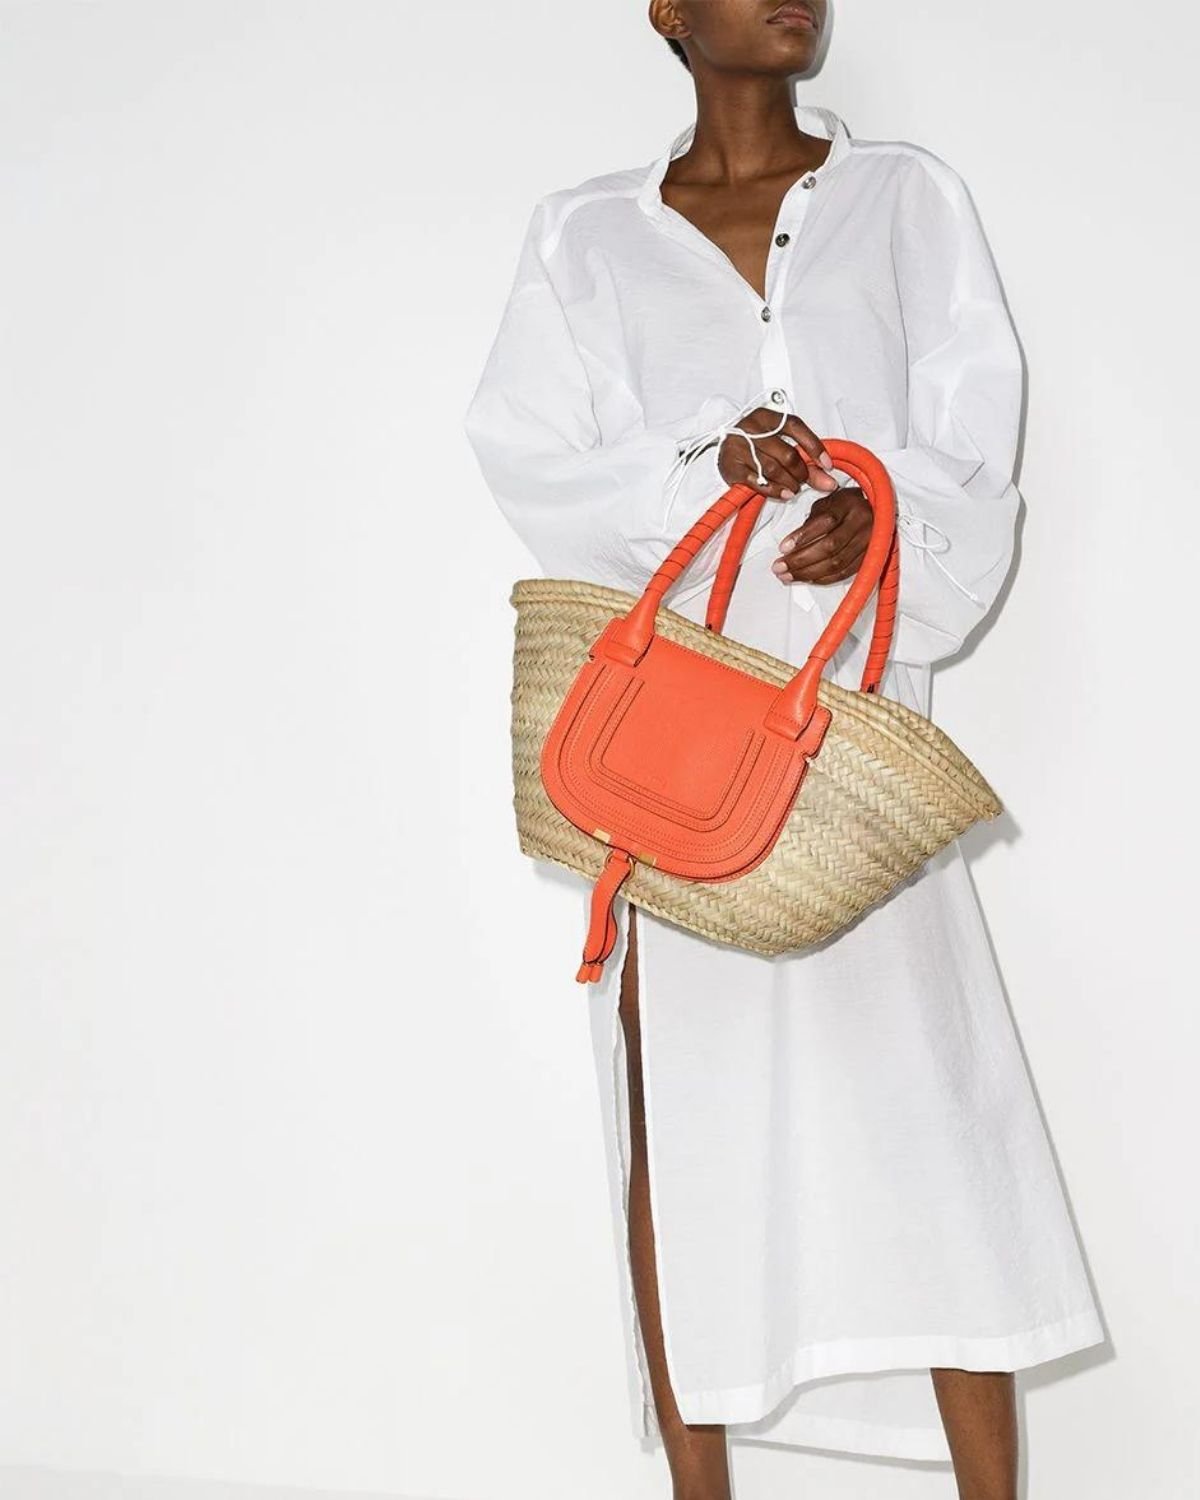 15 Sustainable Beach Bags Crafted with Natural Fibers